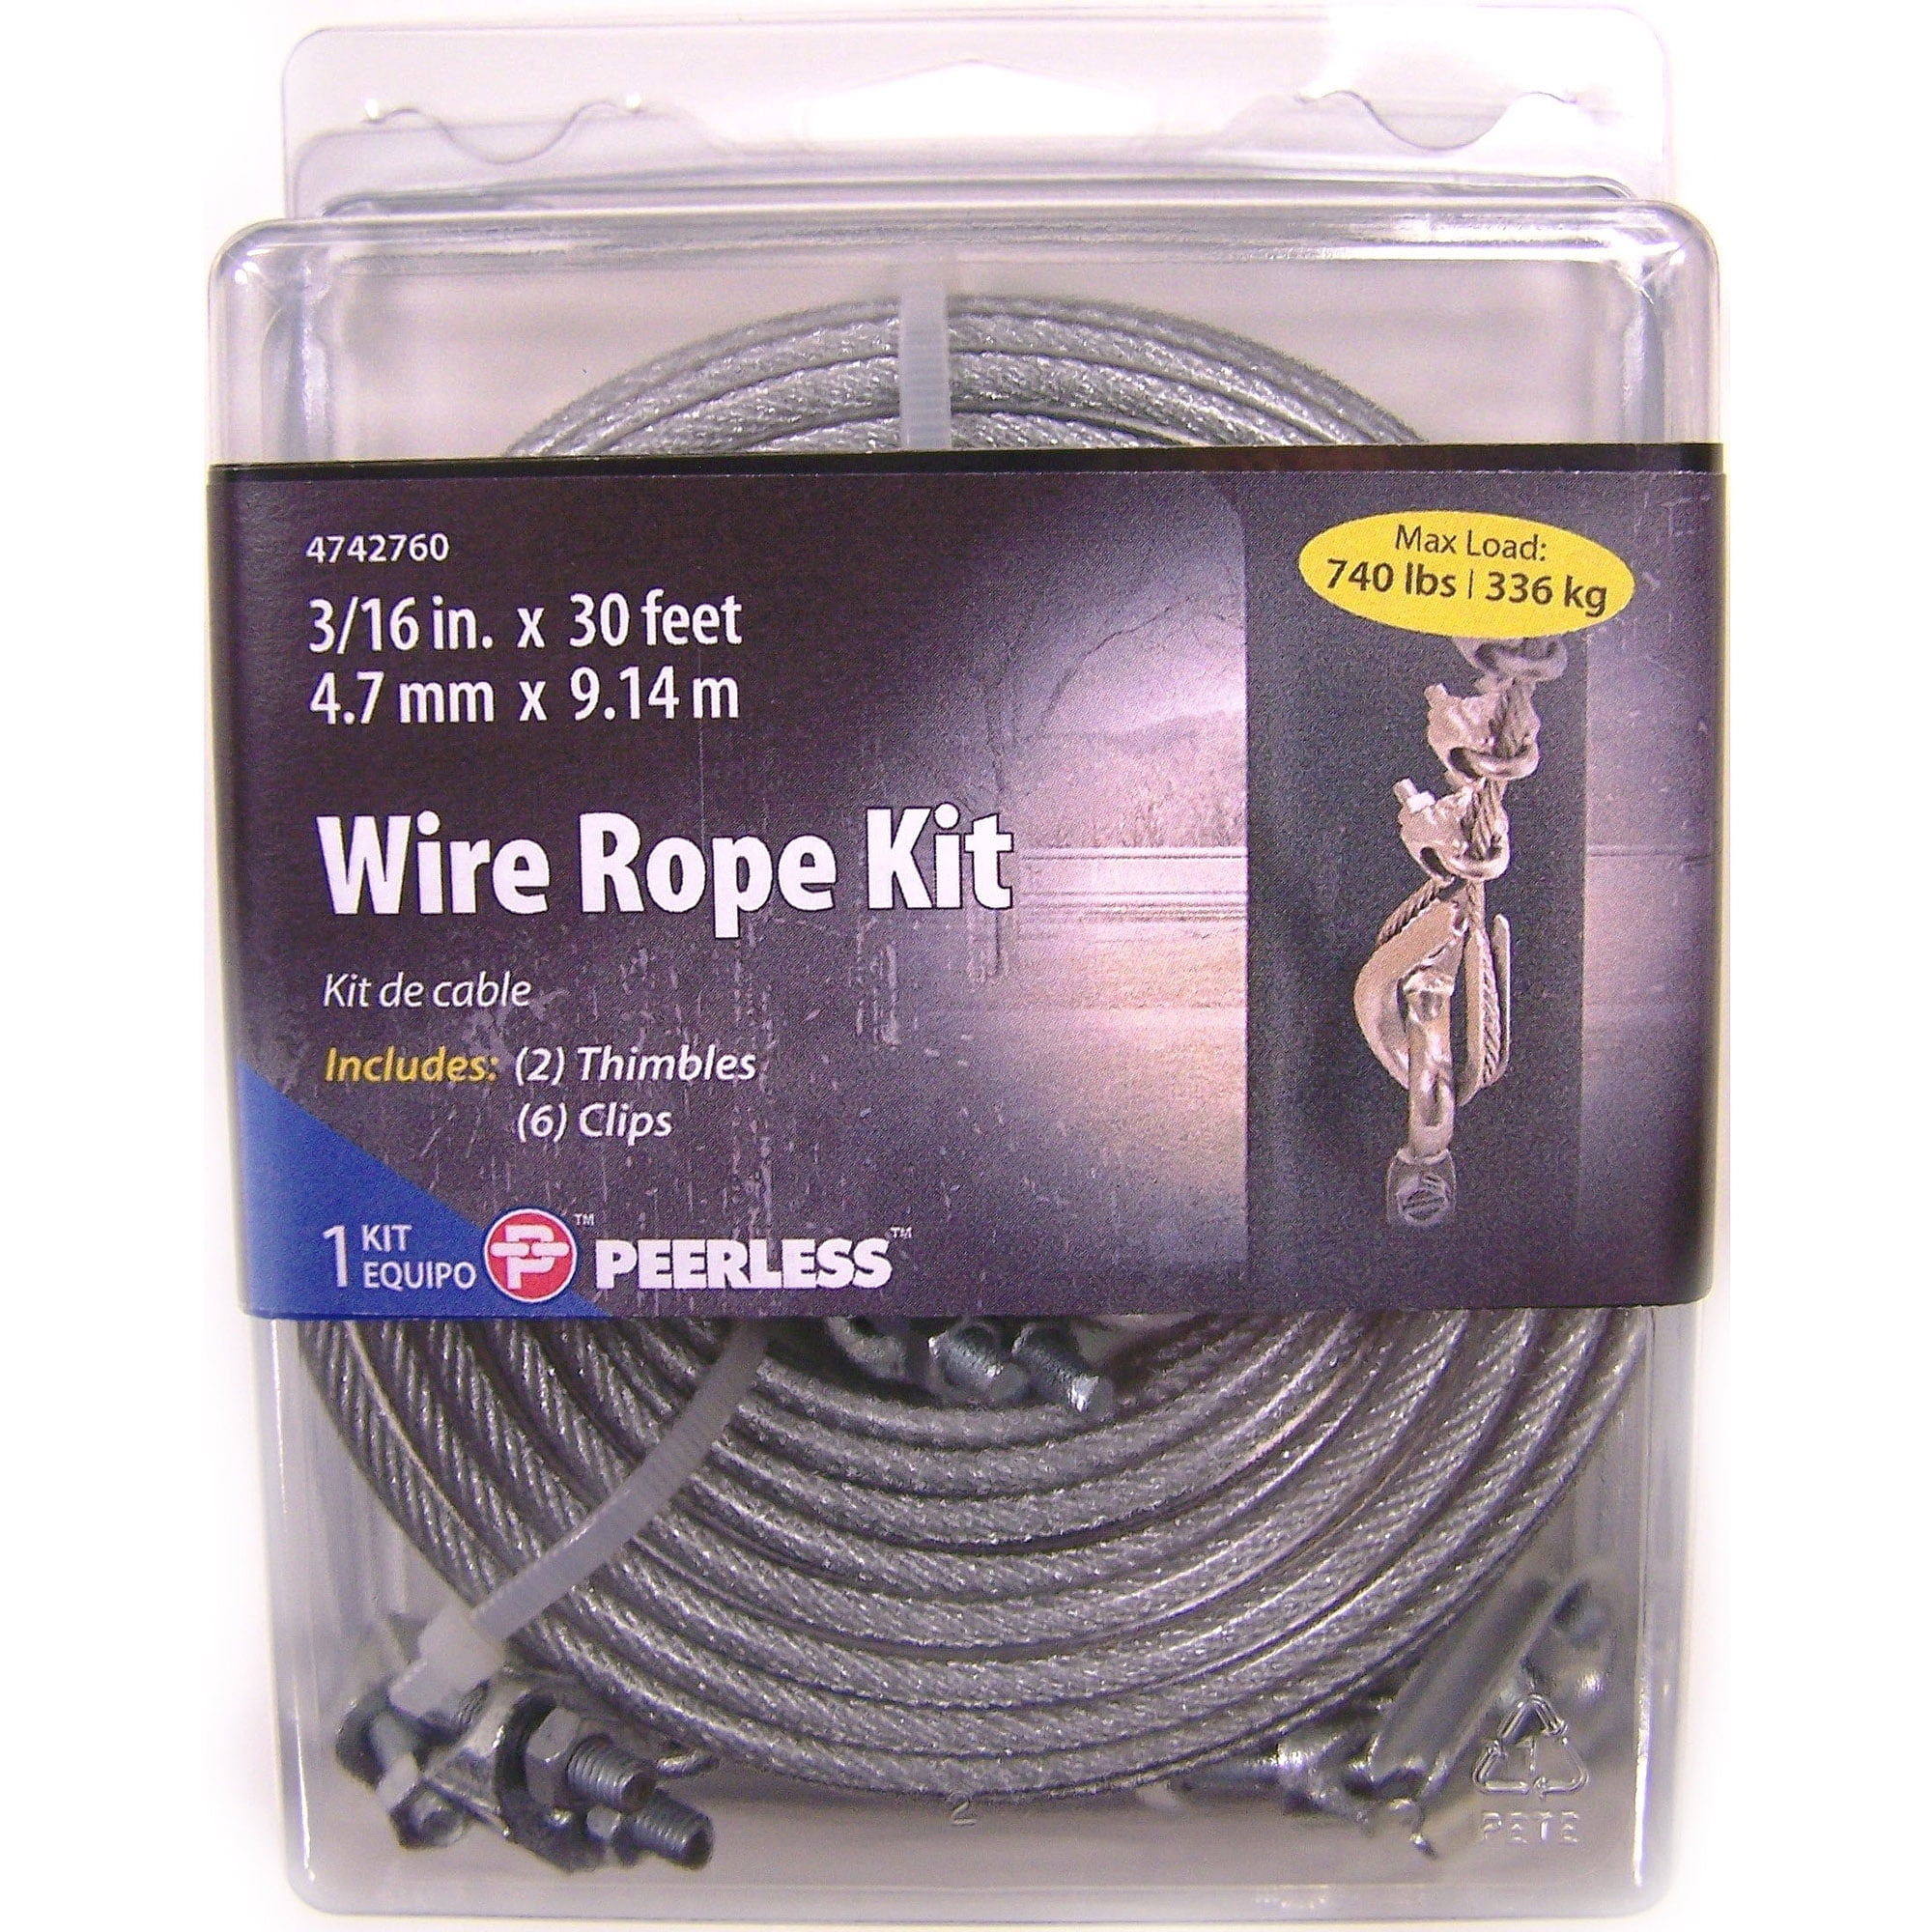 PEERLESS 3/16" x 30' VINYL COATED WIRE ROPE KIT W/ CABLE CLAMPS 